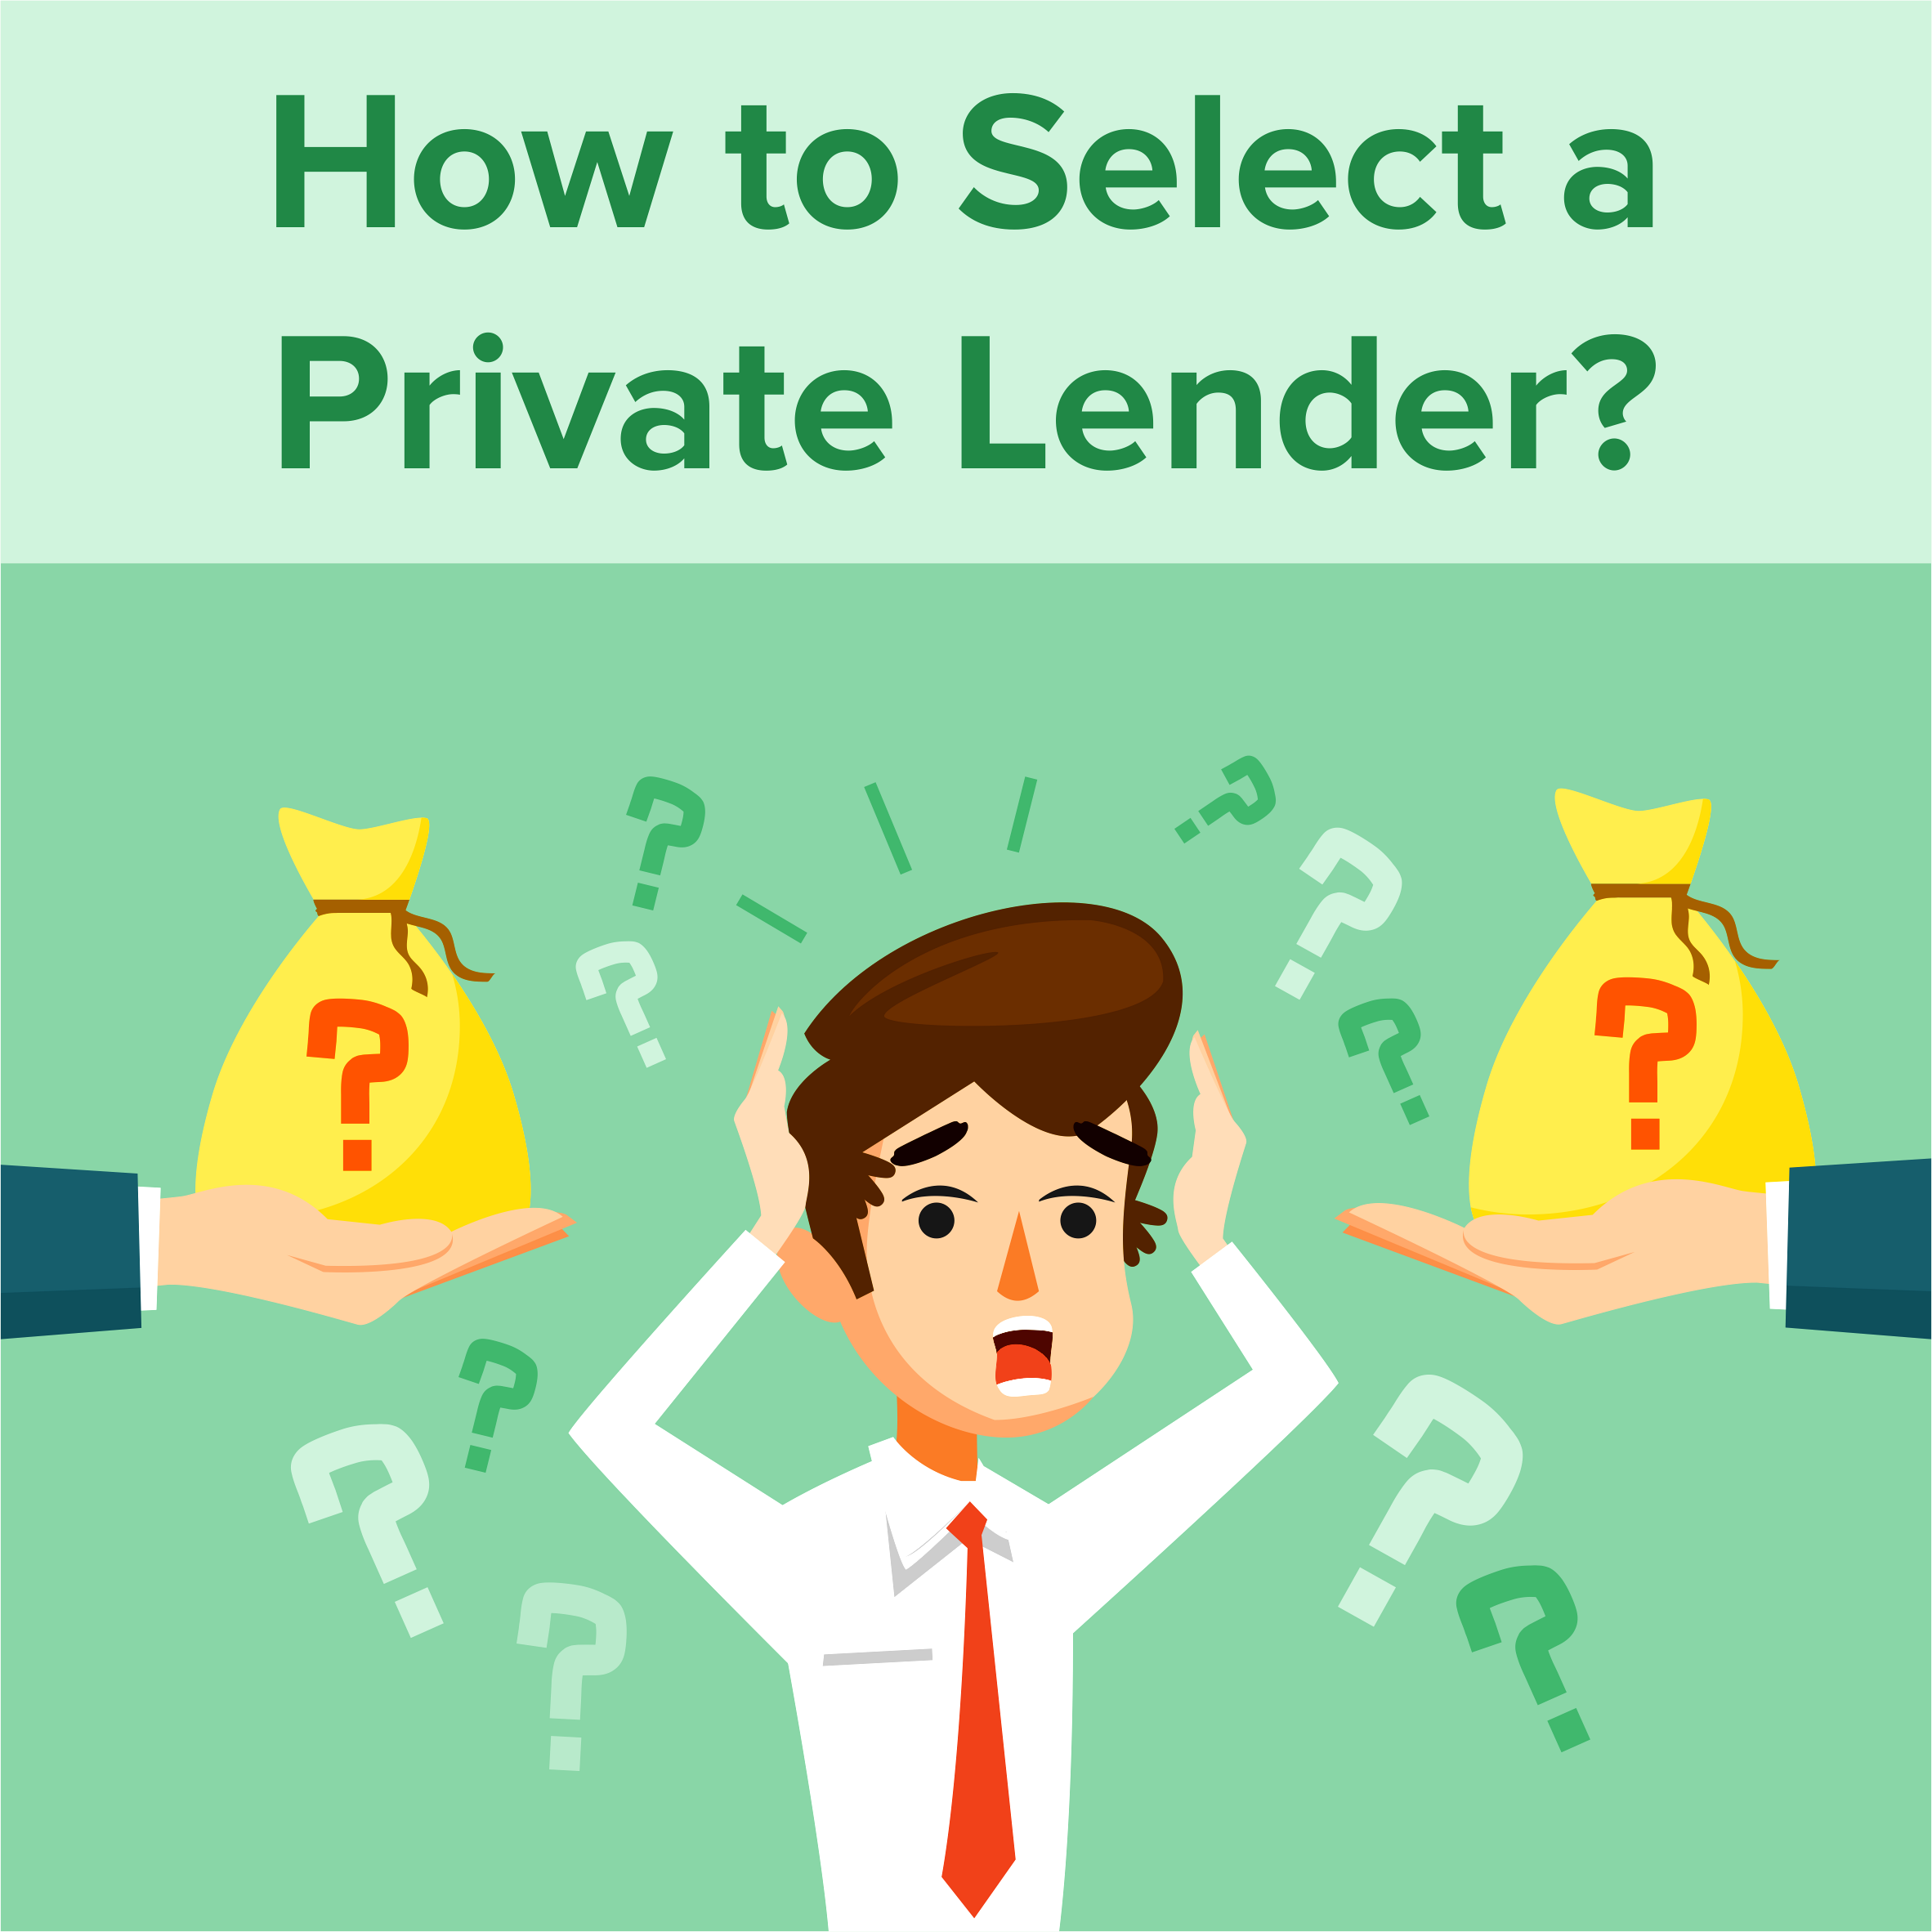 How to Select a Private Lender